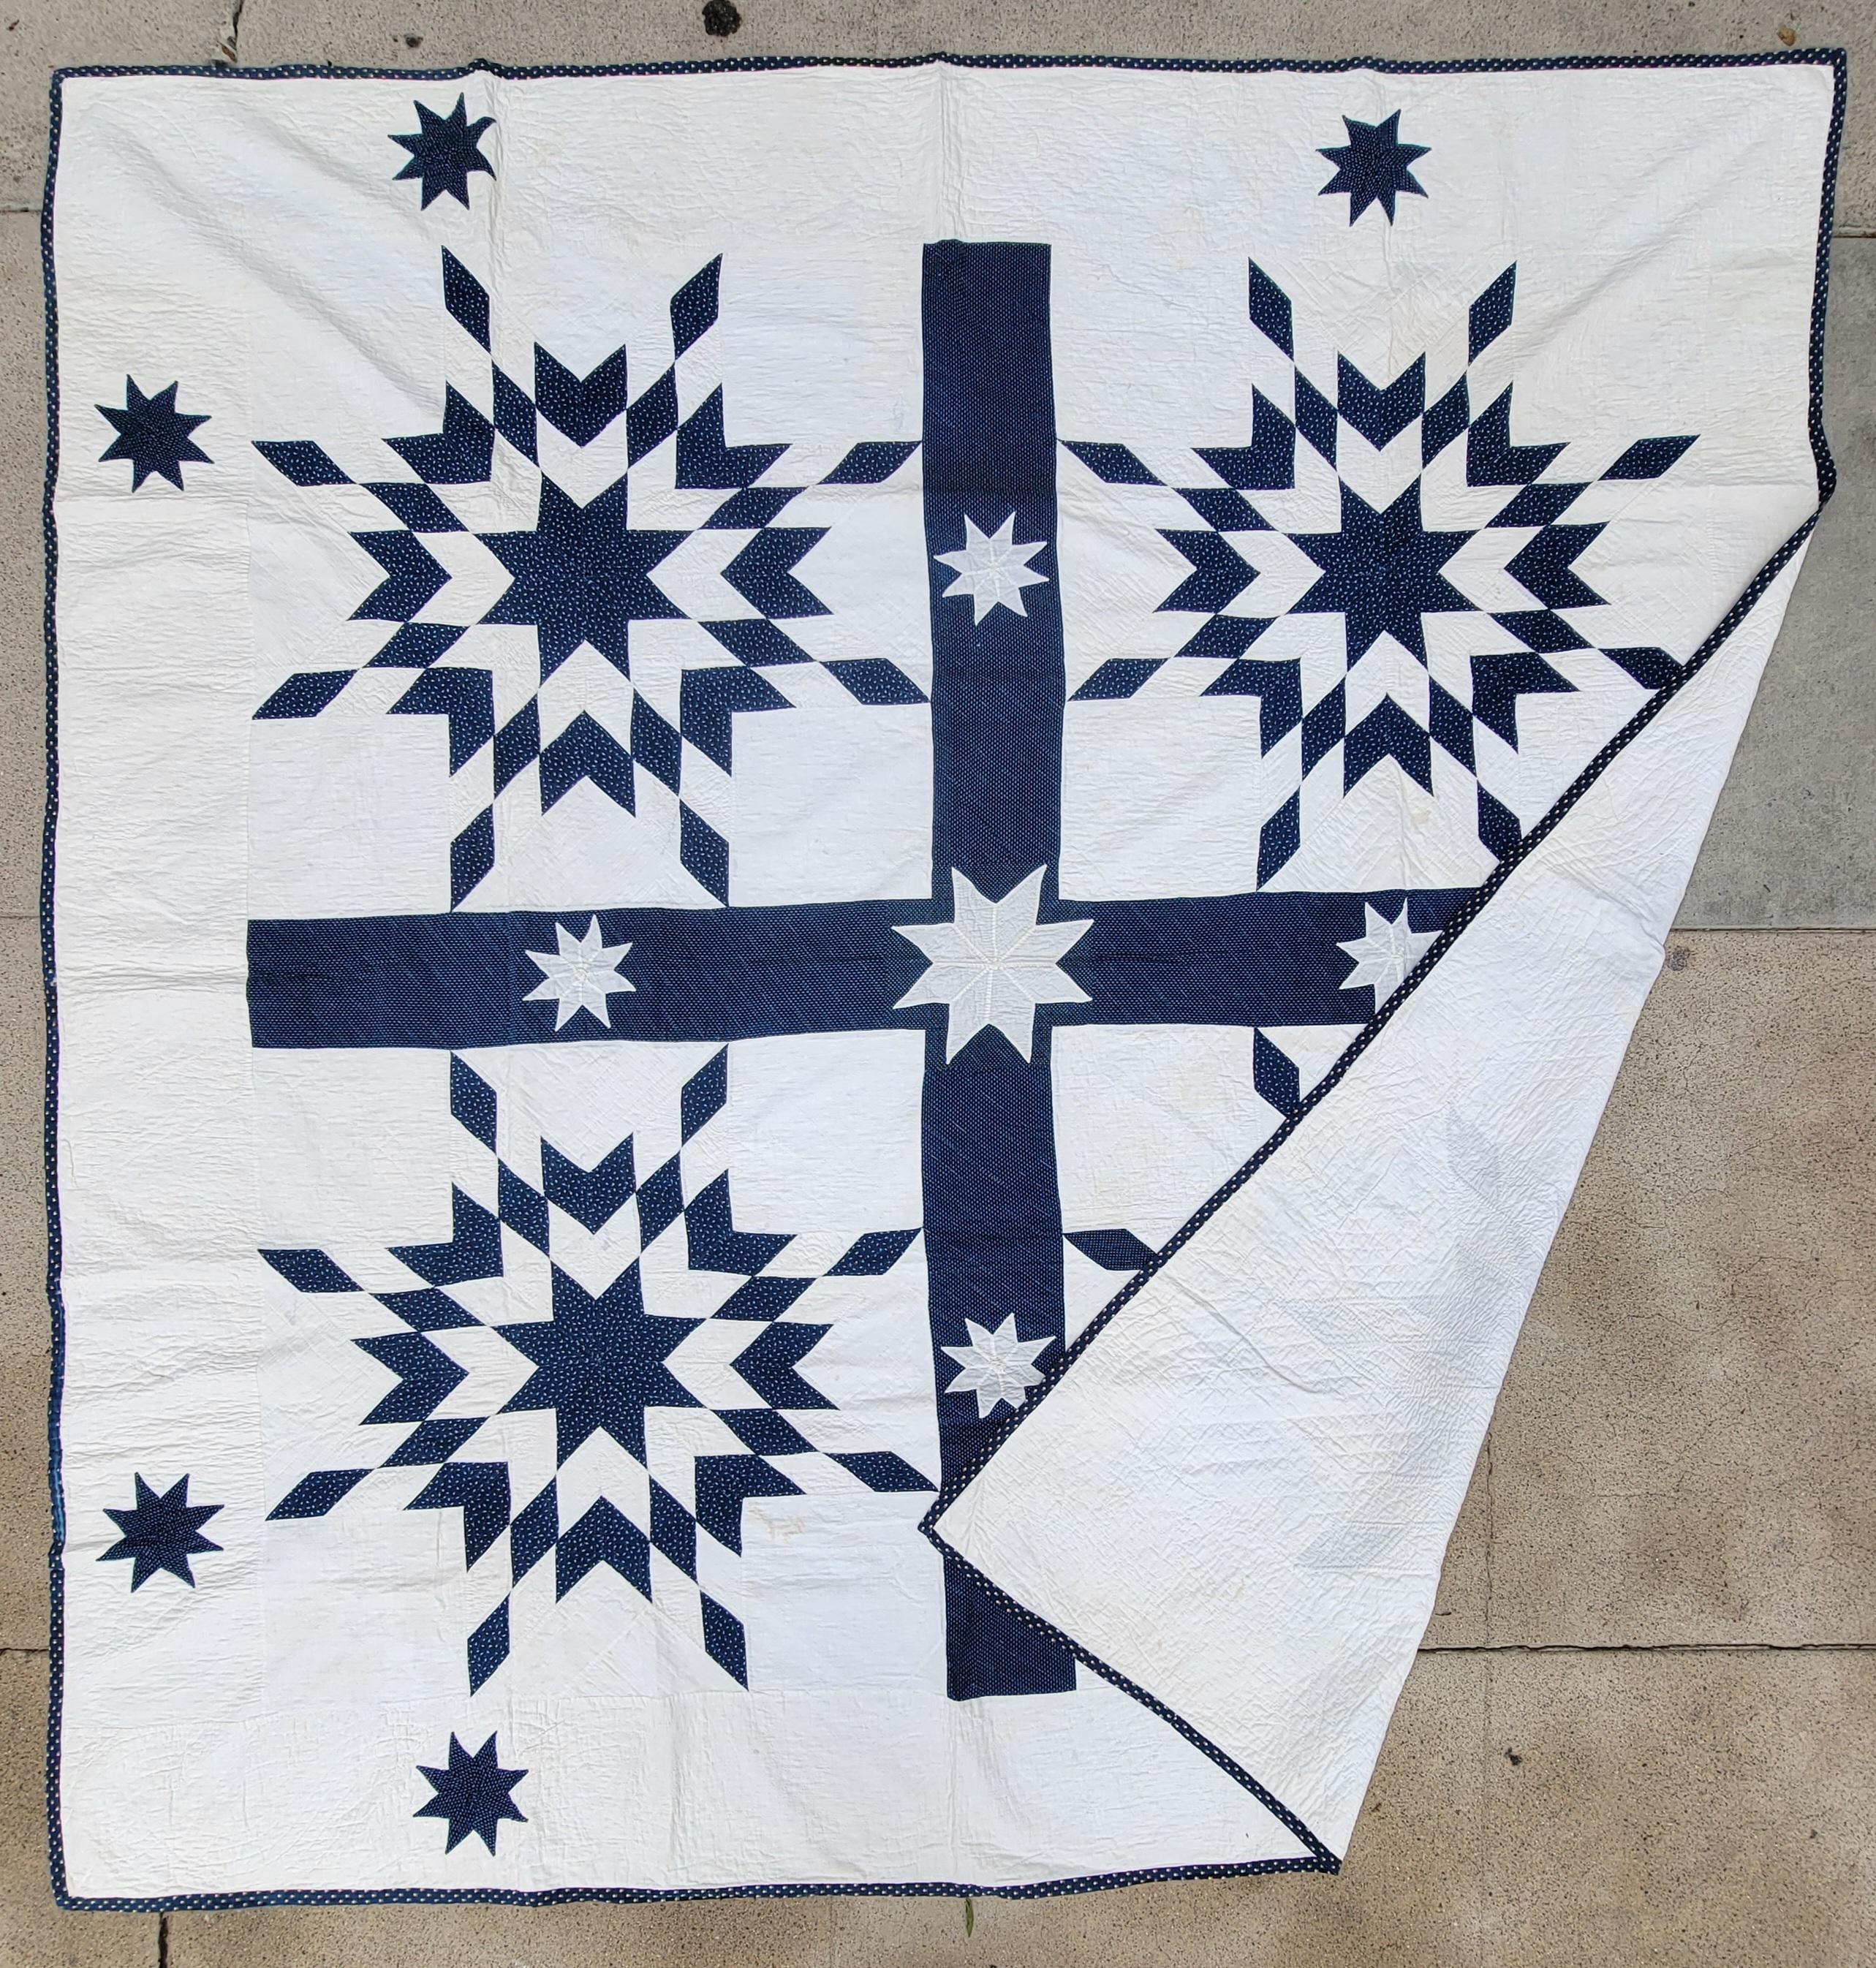 This amazing and most unusual 19Thc folky stars blue & white quilt was found in New England and in fine condition. Most unusual hand appliqued floating stars throughout.This is more then likely a original pattern.